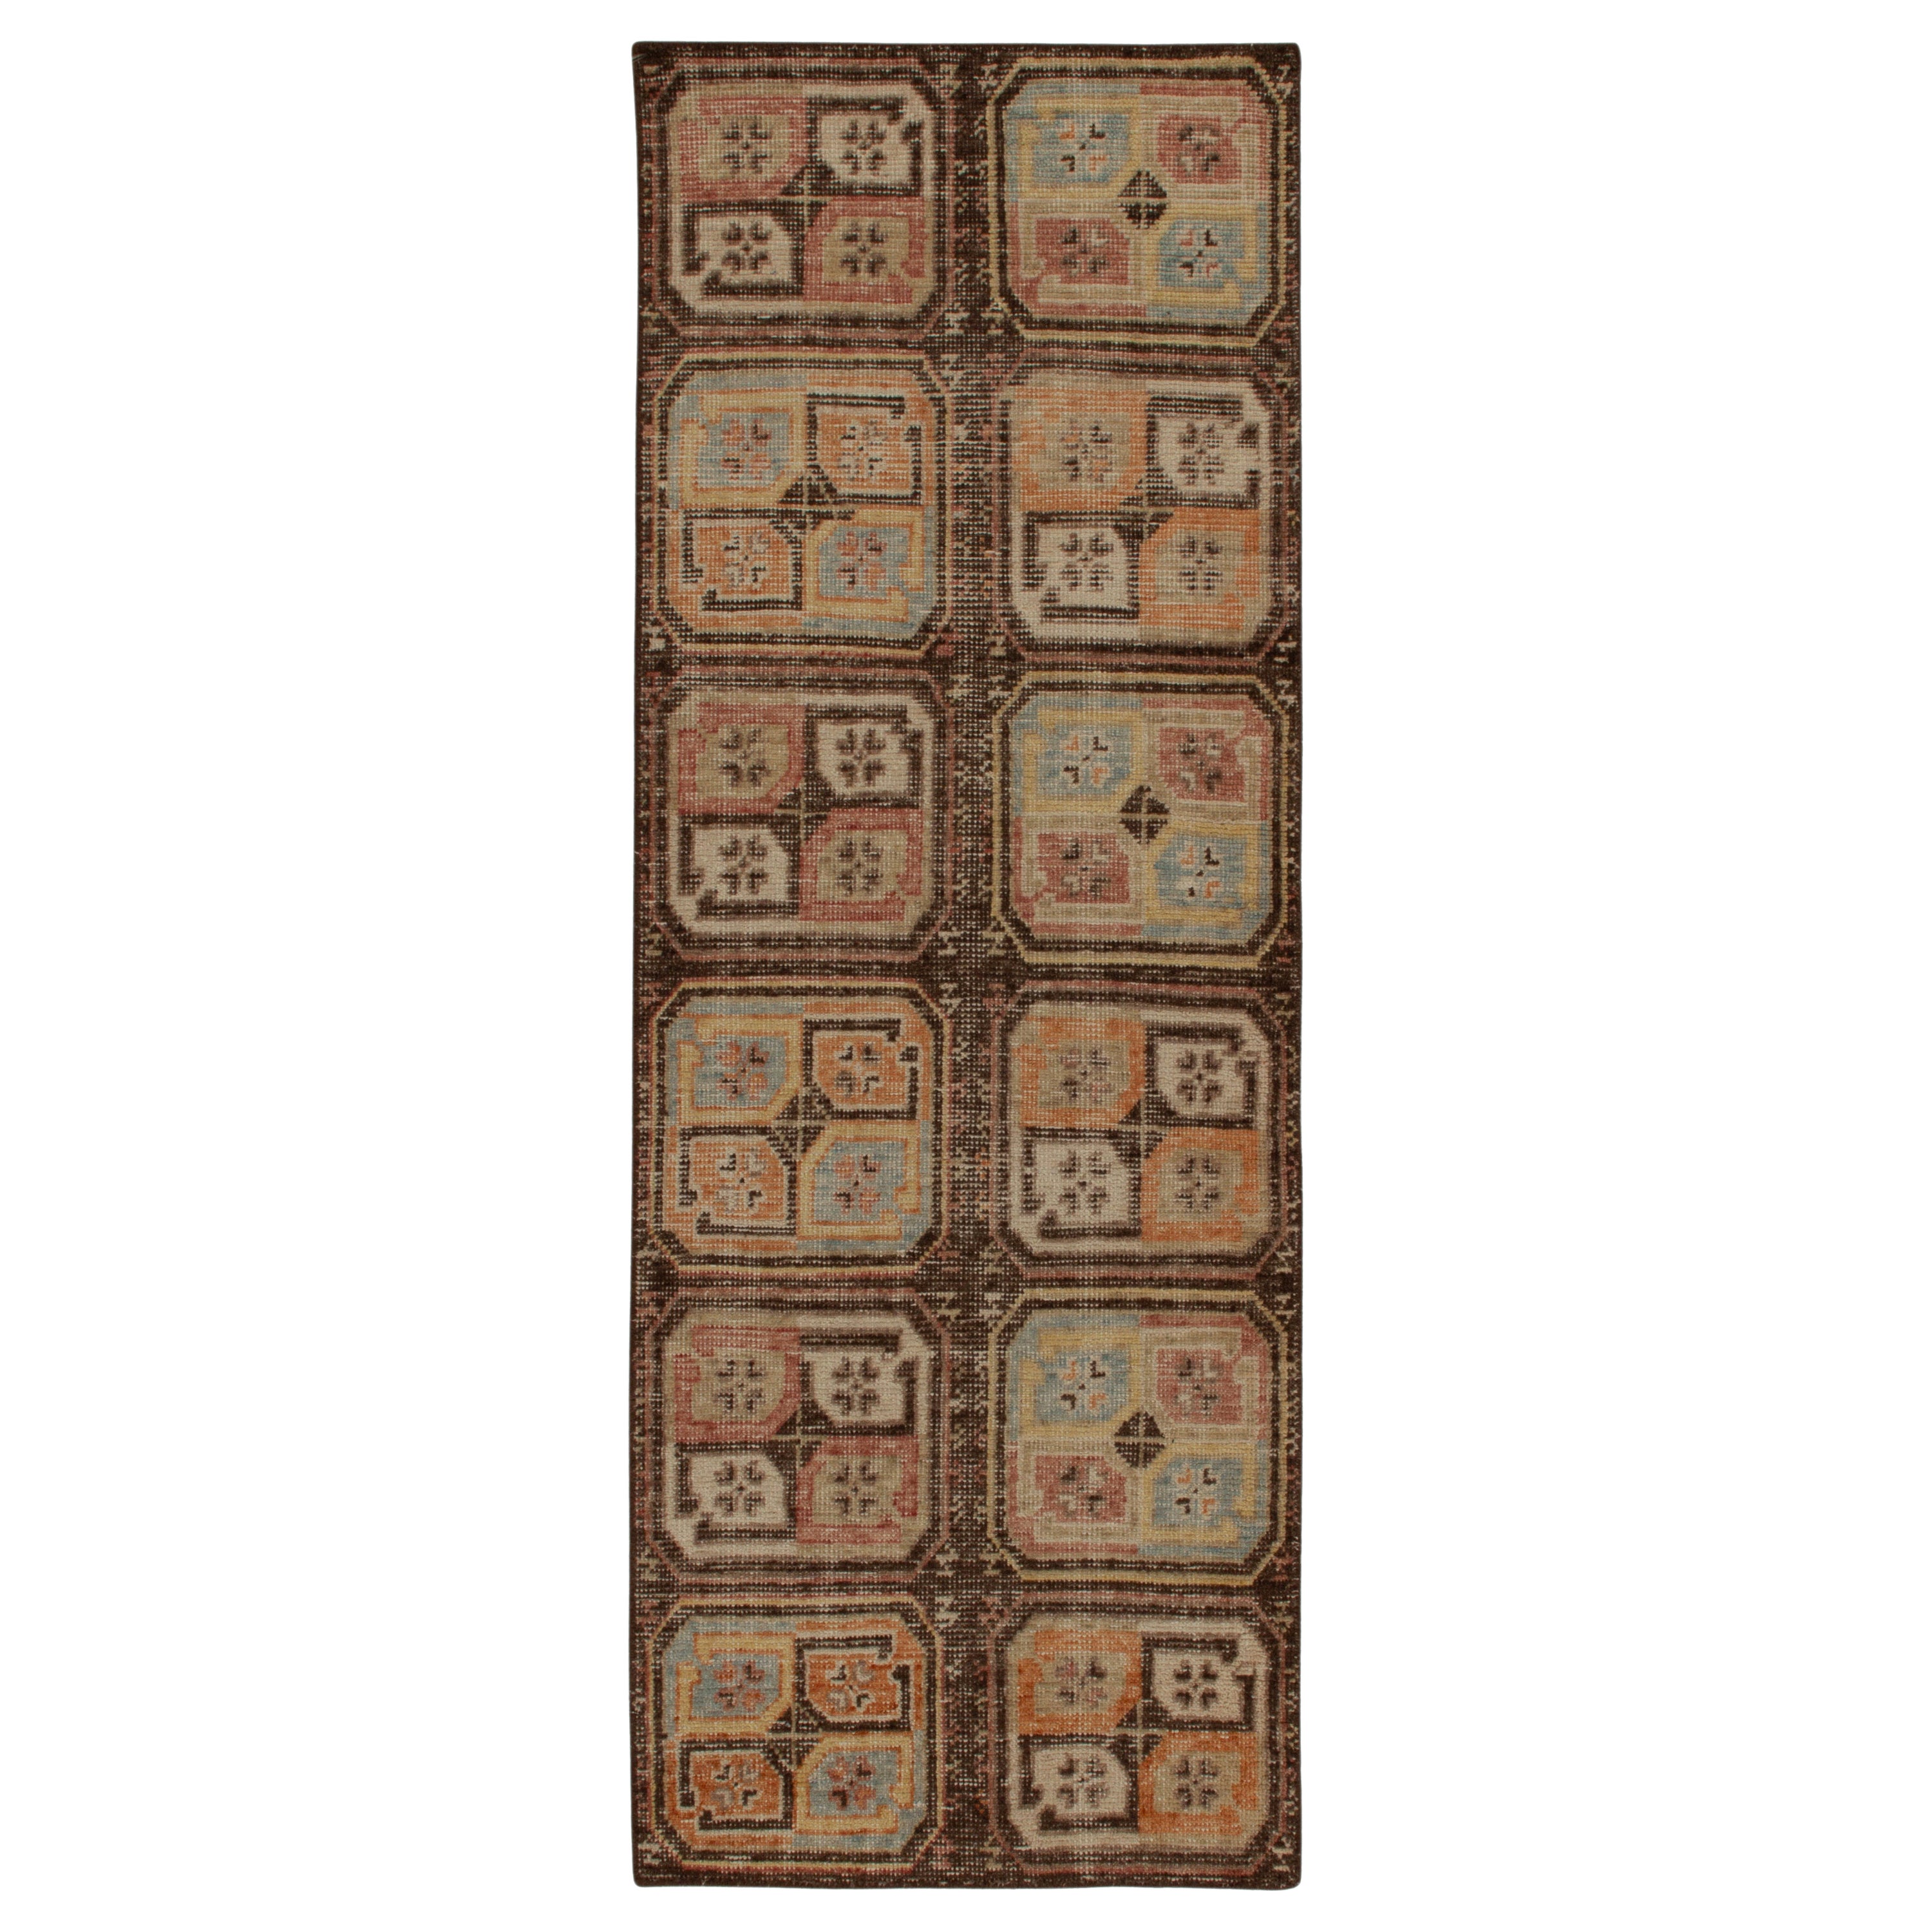 Rug & Kilim’s Distressed Tribal Style Runner in Beige-Brown & Colorful Emblems For Sale